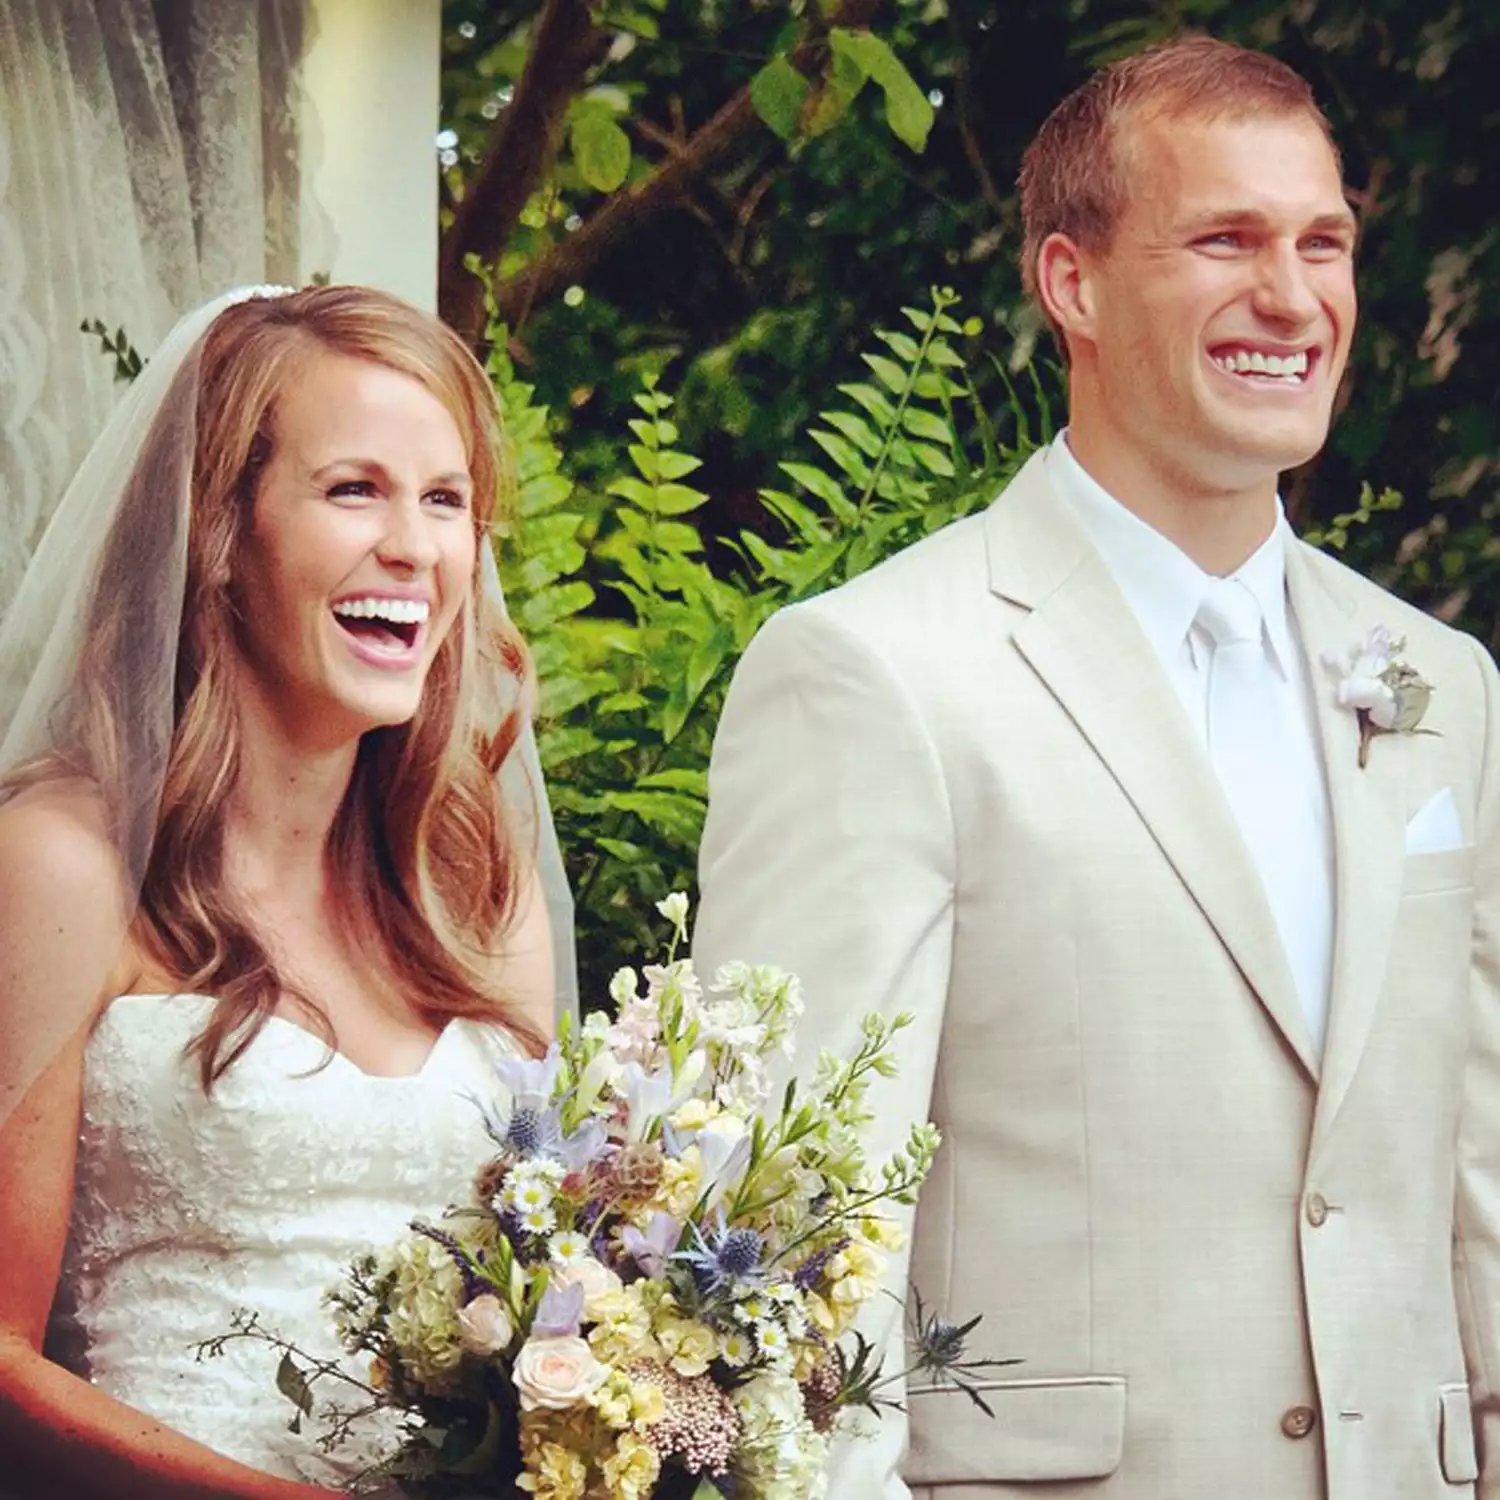 Kirk Cousins and Julie Hampton tied the knot in 2014